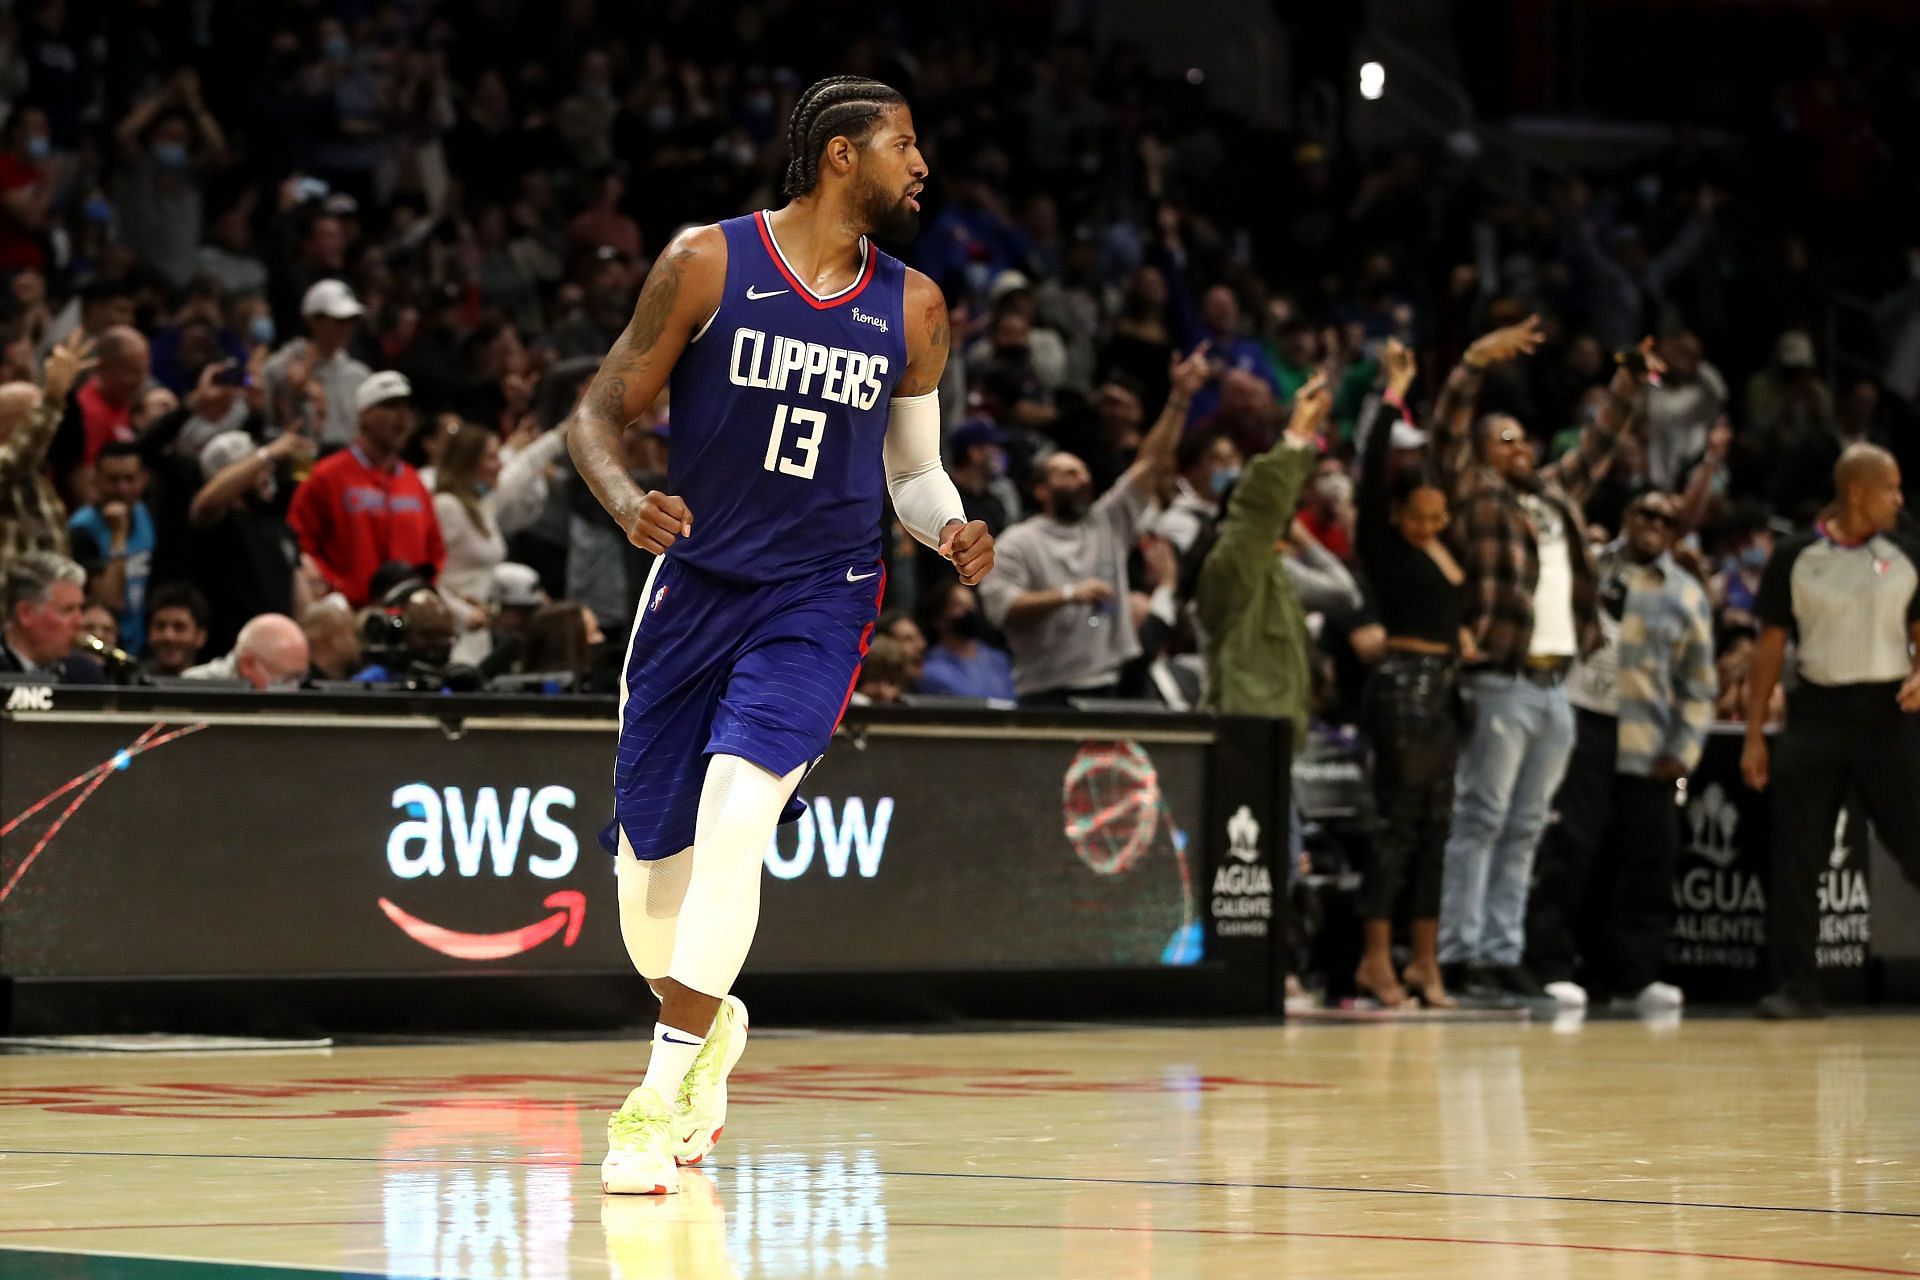 The LA Clippers secured a 117-109 win against the Portland Trail Blazers in their previous game